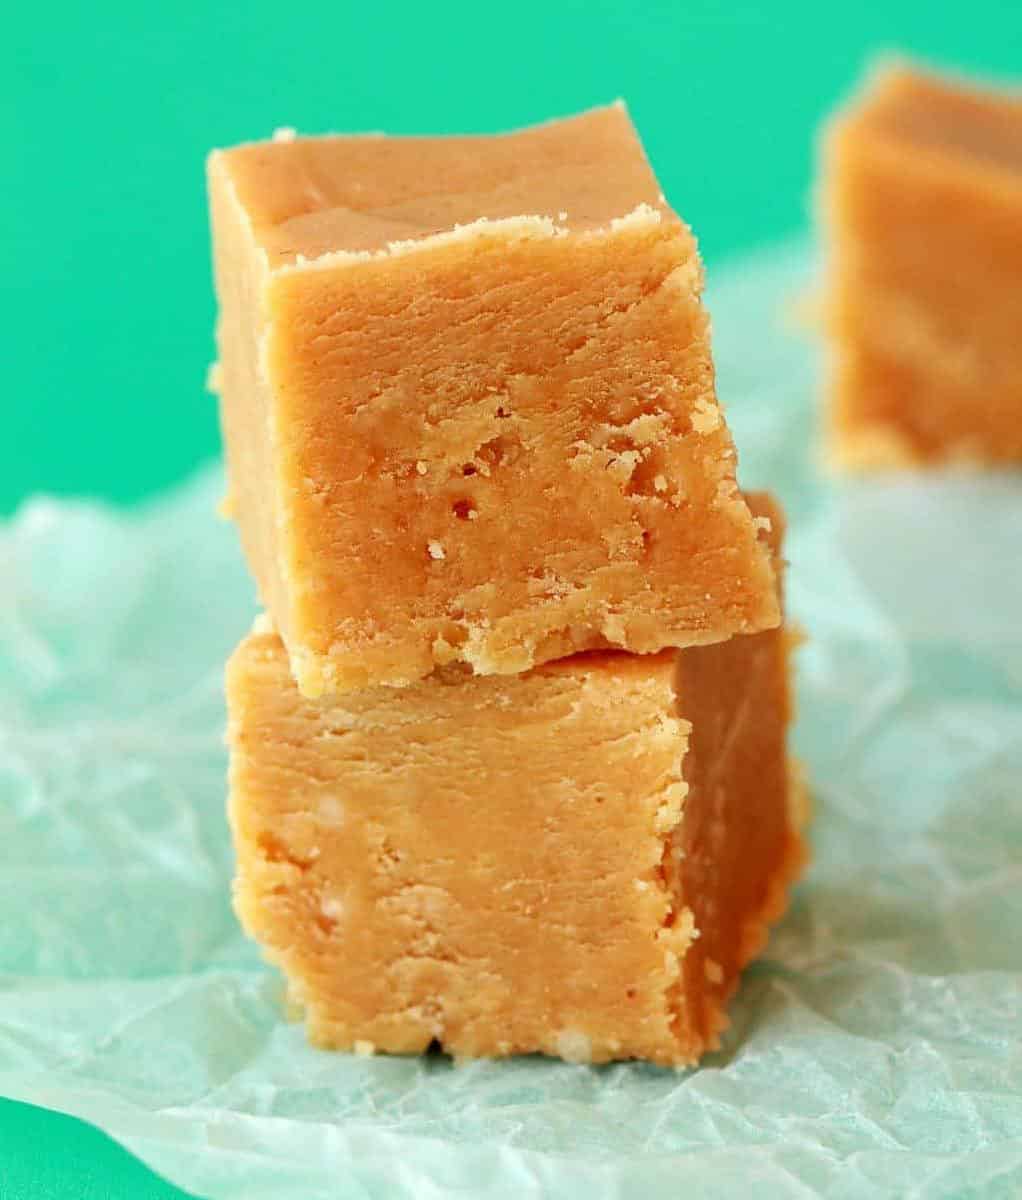  This fudge is so rich and creamy, you won't even know it's vegan.